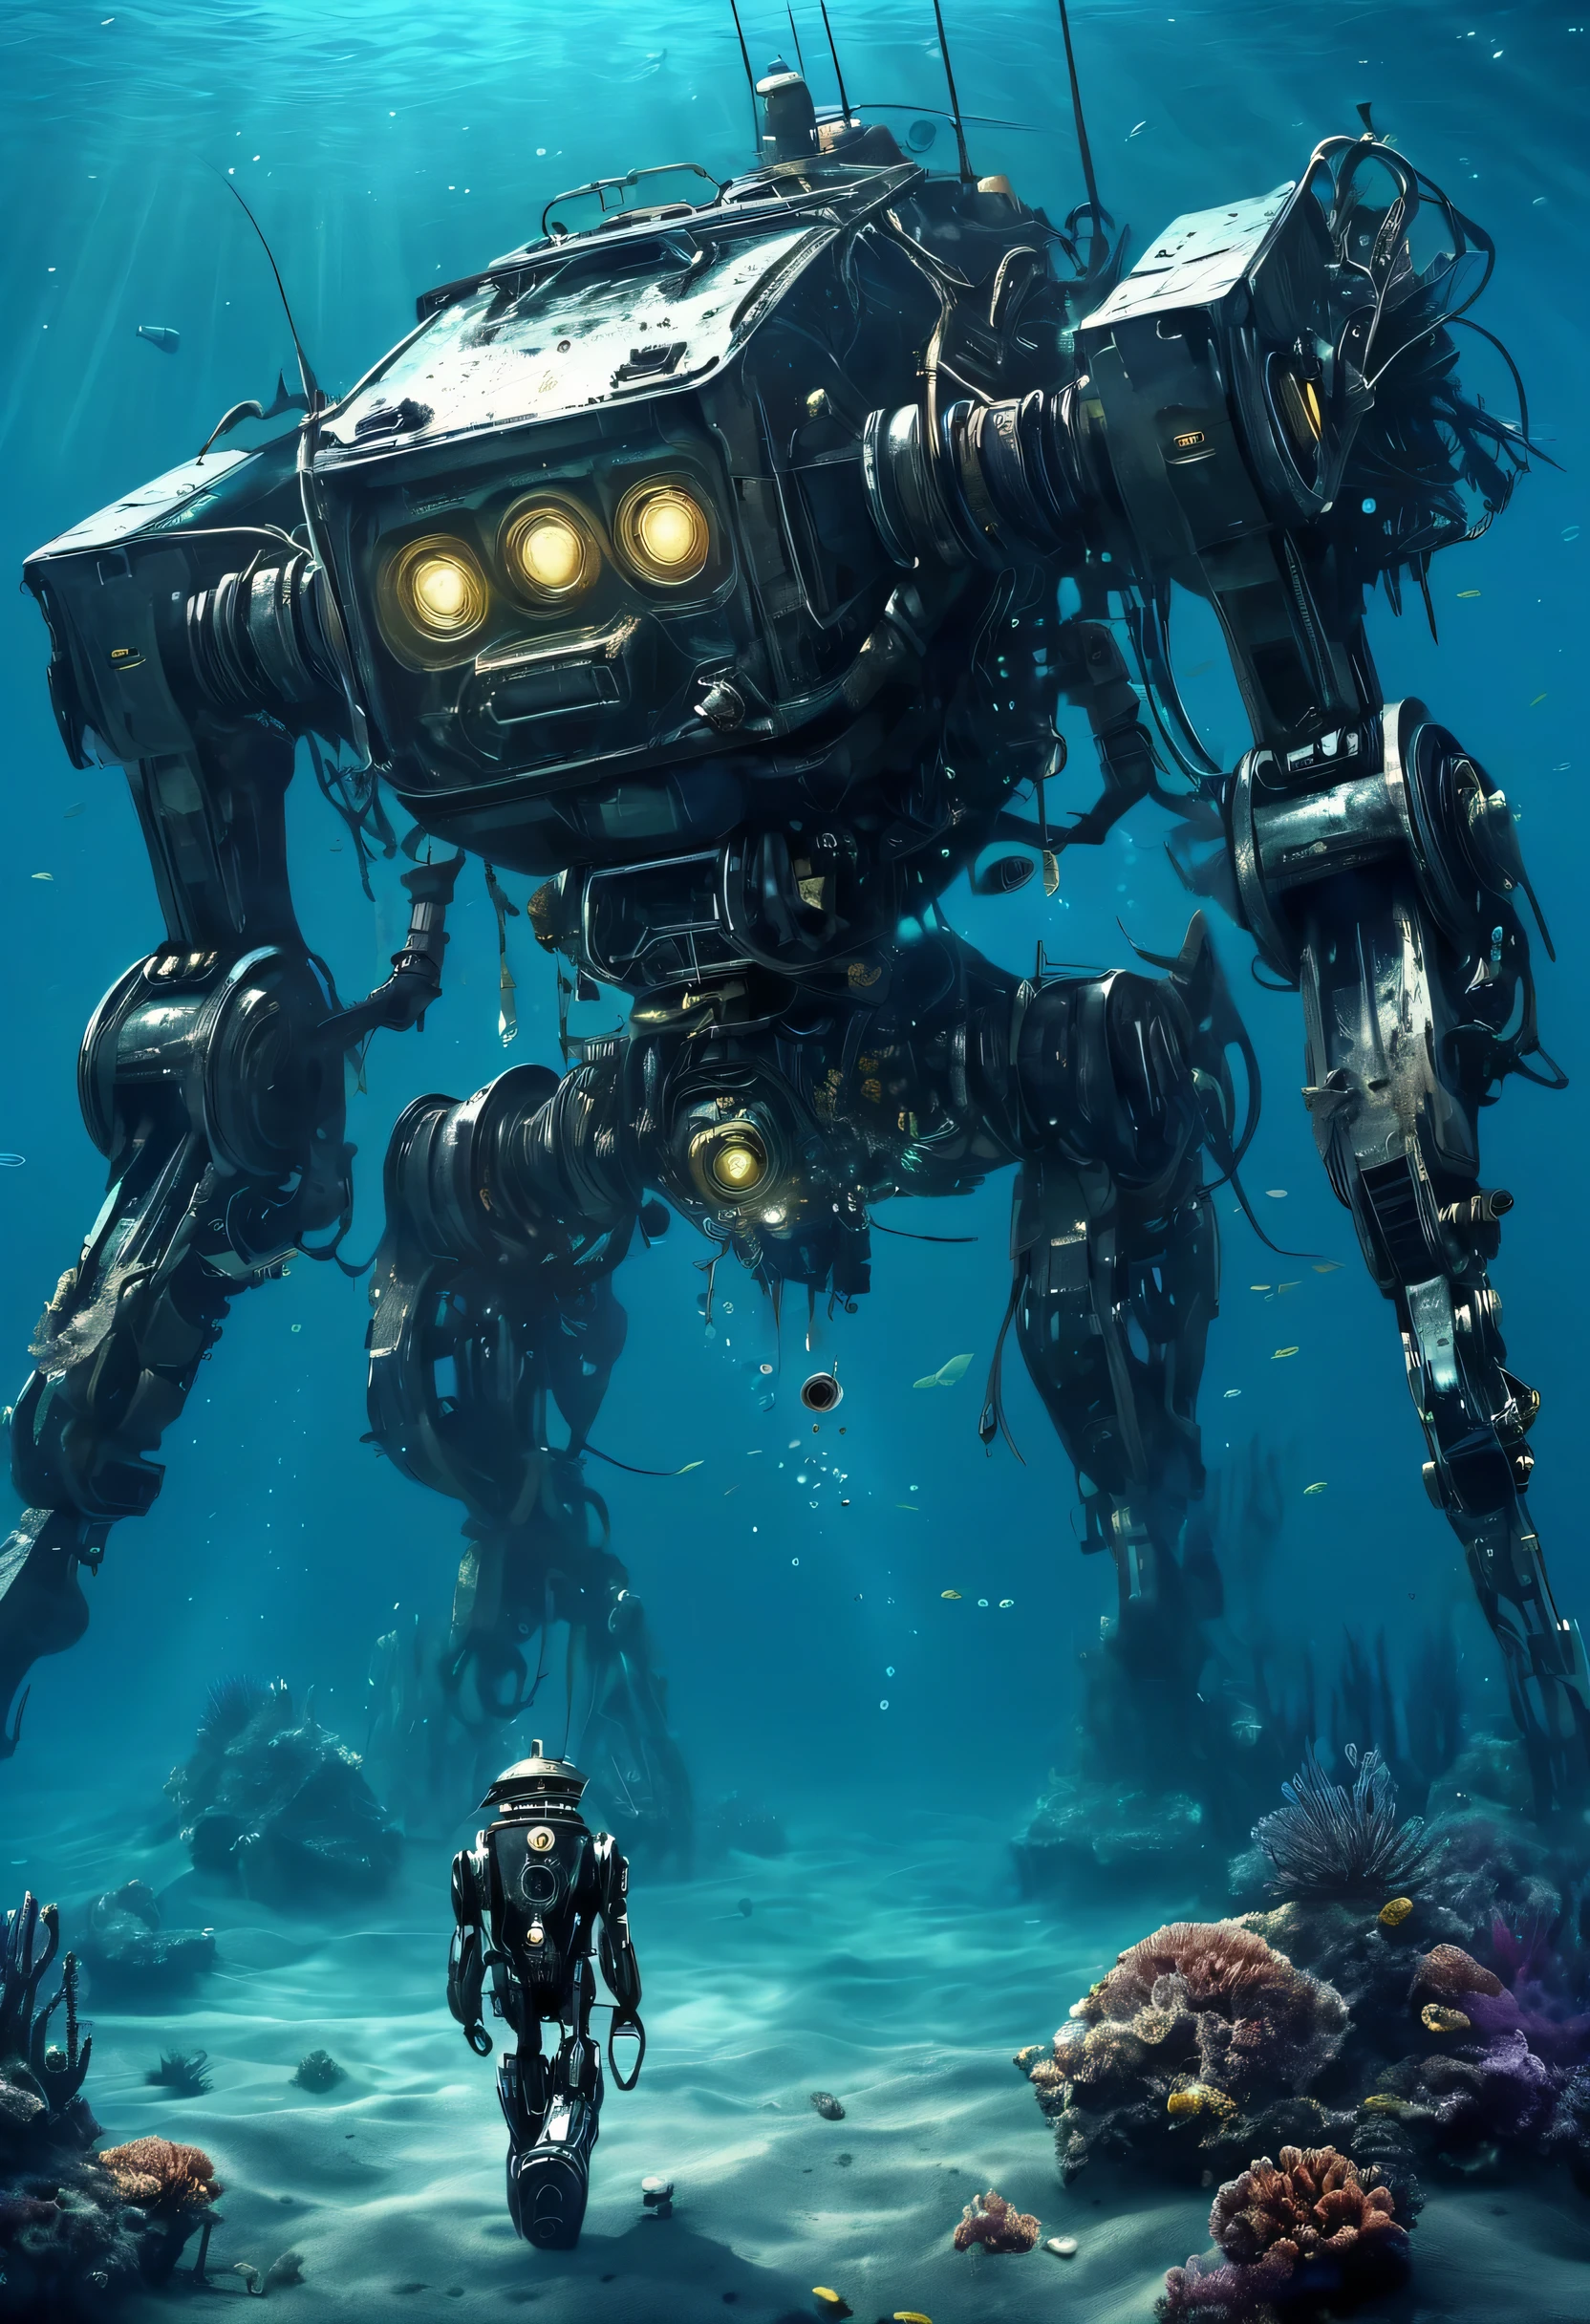 Deep Sea Scenery,The bottom of the sea,abandoned mecha:Fusion of futuristic science and steampunk,world without humans,arm,dirty,weapons,,Remains of a destroyed robot,lost peace,forsaken,dim,masterpiece,digital art,lonely,pessimism,dirty,dyeing,Mysterious,fantasy,The remains of a broken robot sleeping in the deep sea,Deep Sea Scenery:In detail